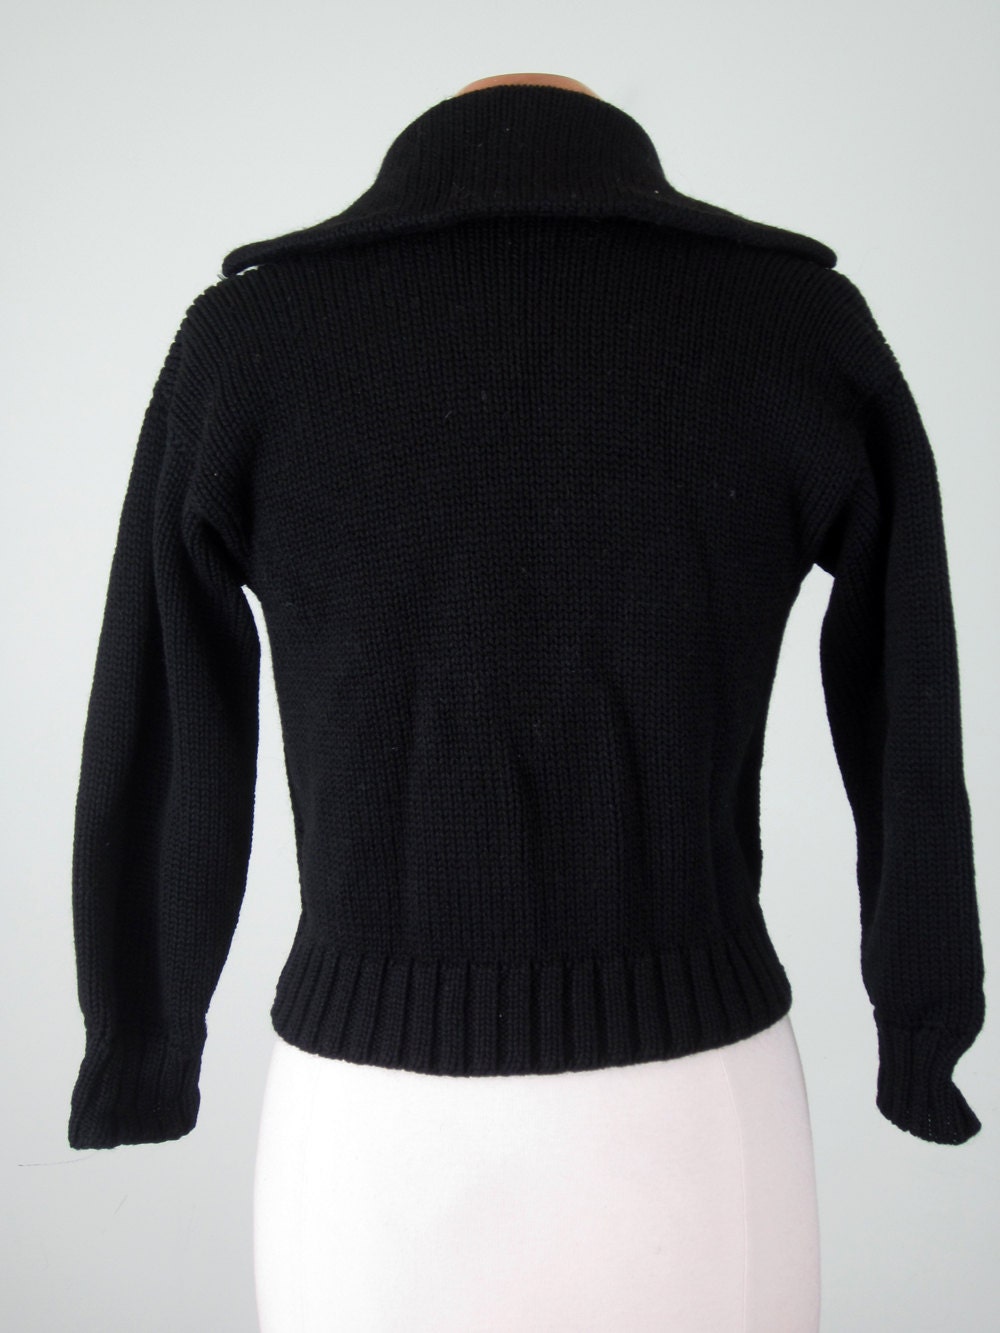 40s sweater / black wool knit cropped button cardigan s m